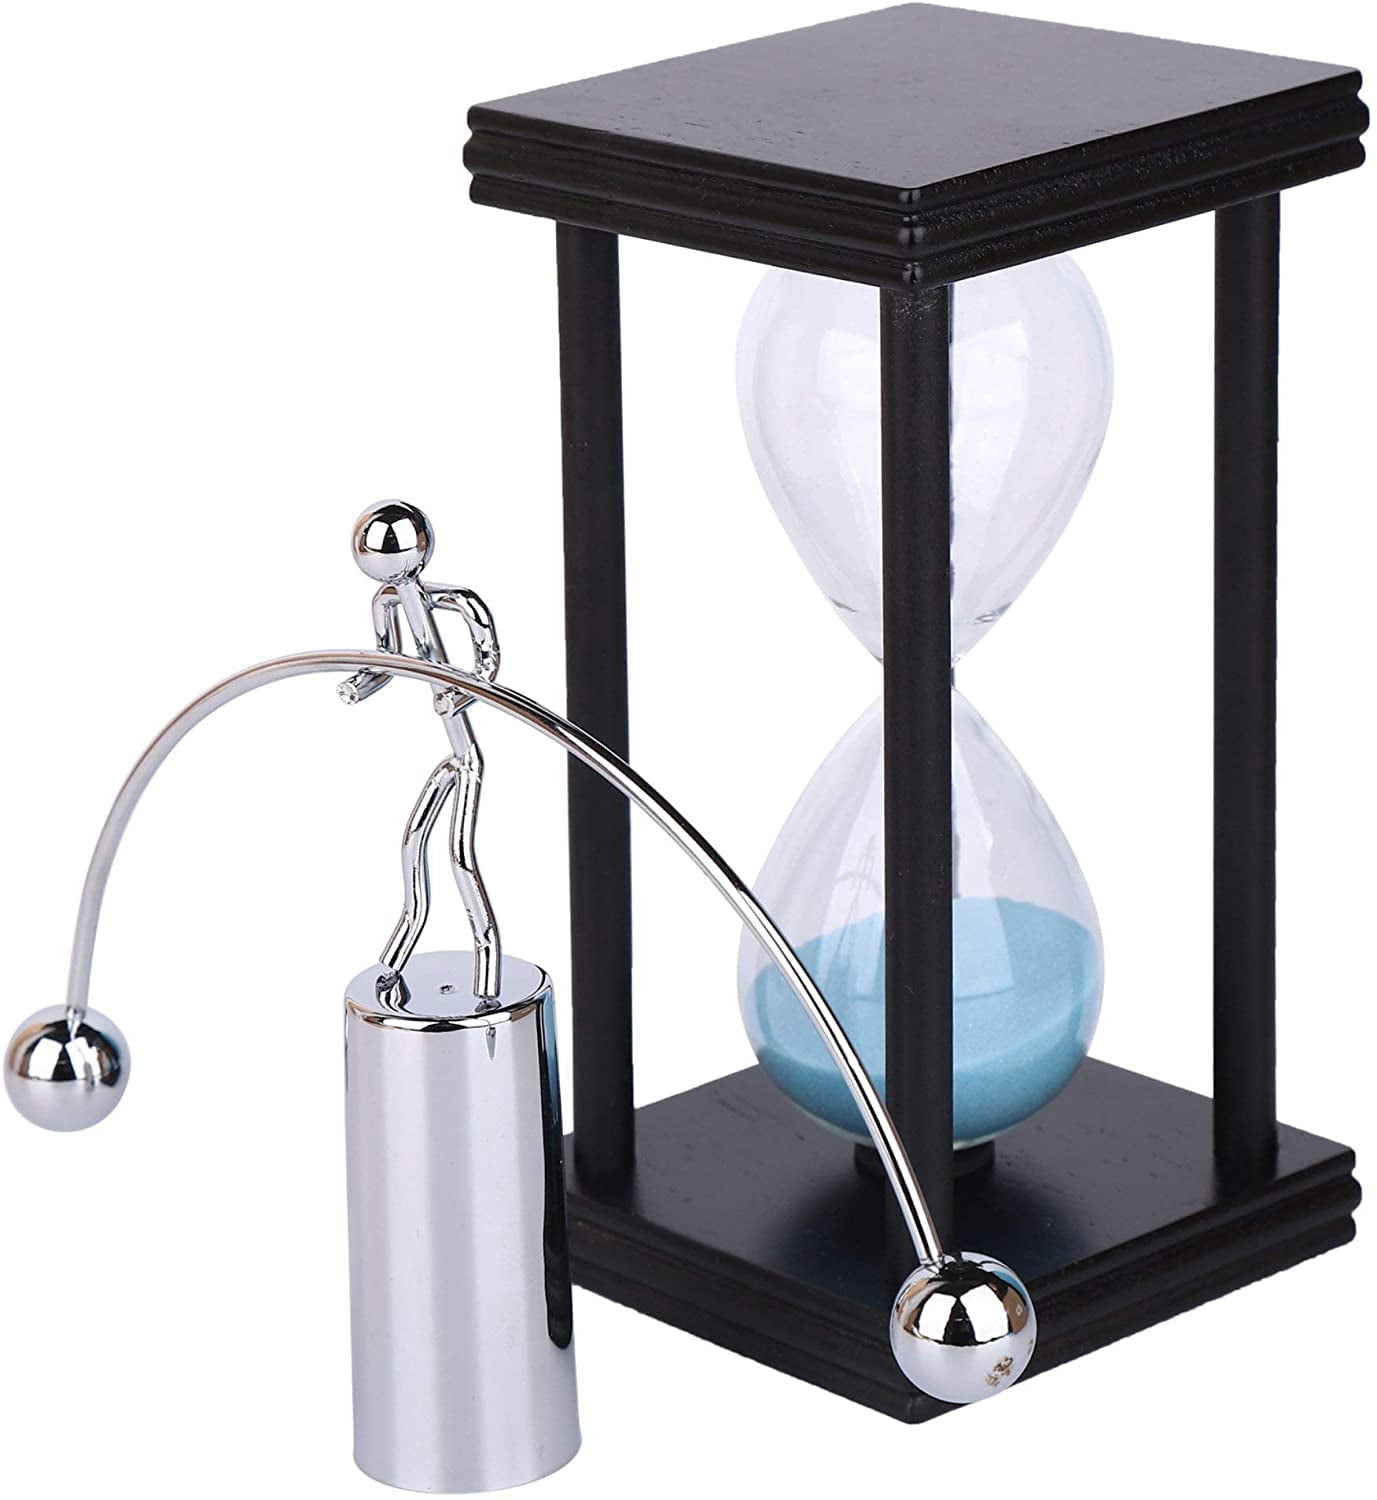 Floating Hourglass Clear Glass Blue Water Sand Timer Desk Kitchen Gift Lot of 3 